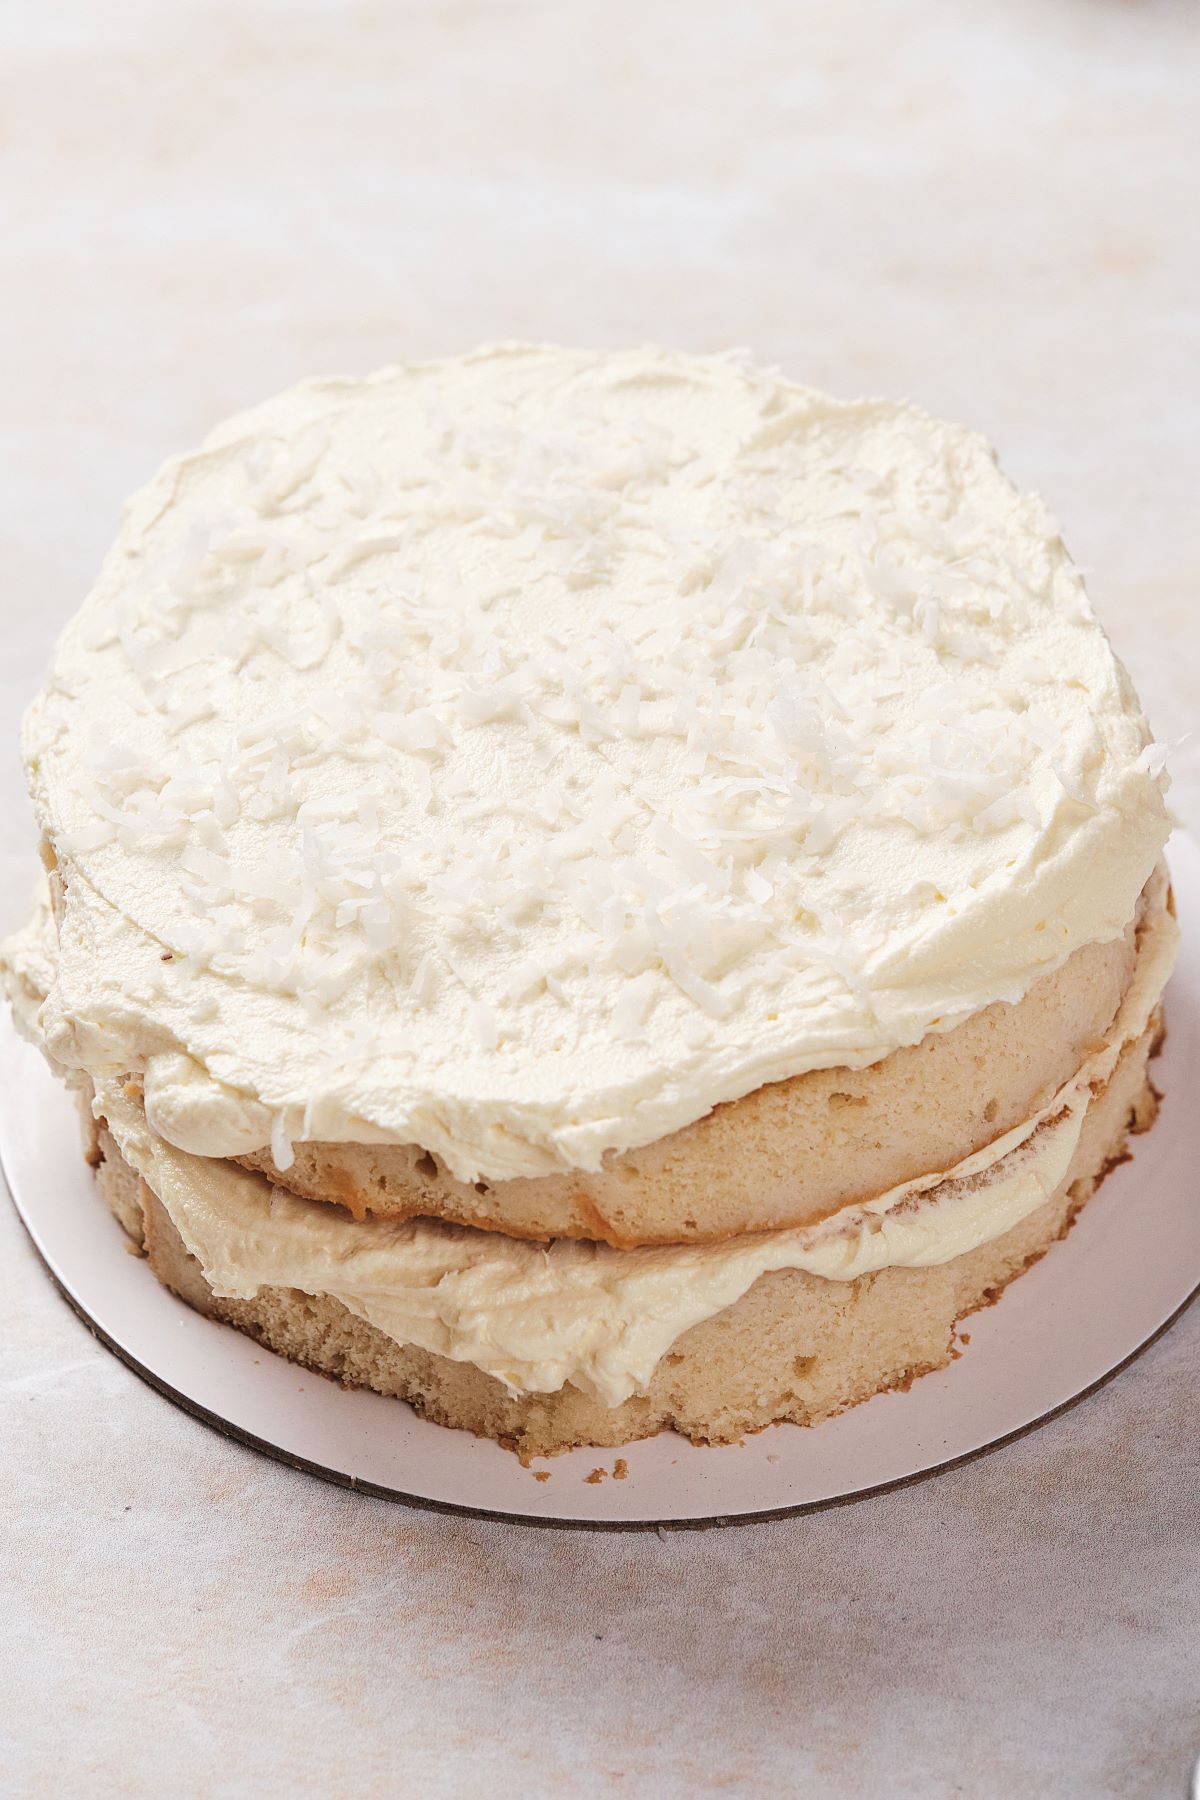 Two layers of the coconut cake being layered with vanilla buttercream and coconut flakes.